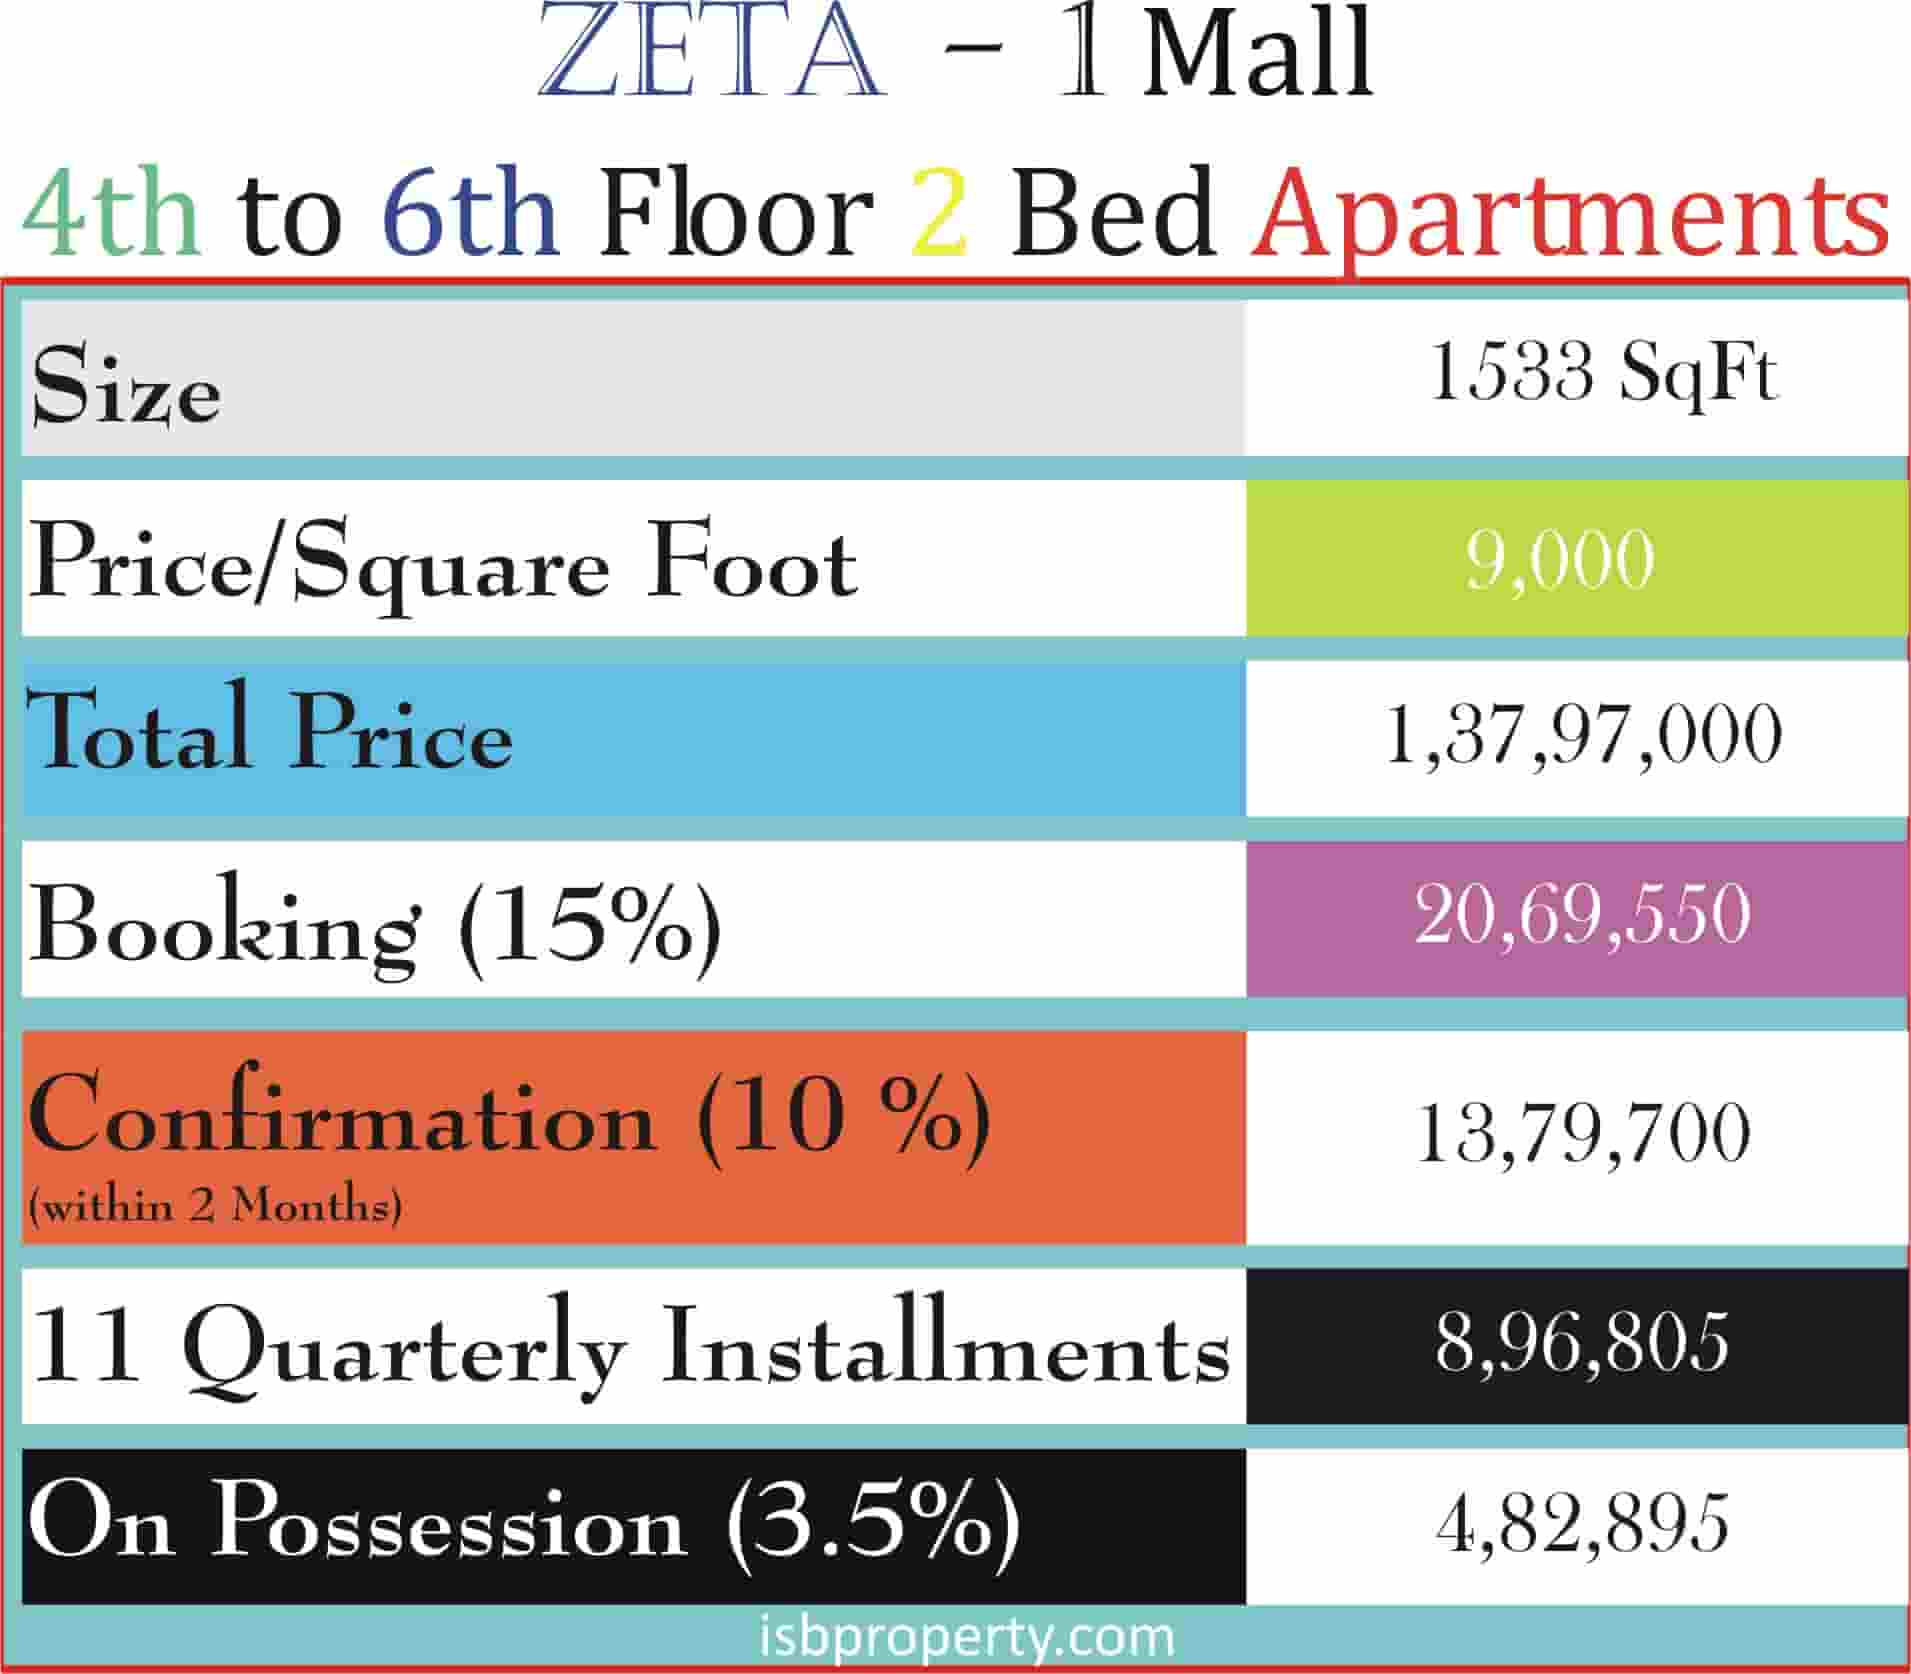 Zeta-1 Mall 4th to 6th Floor Apartments Payment Plan